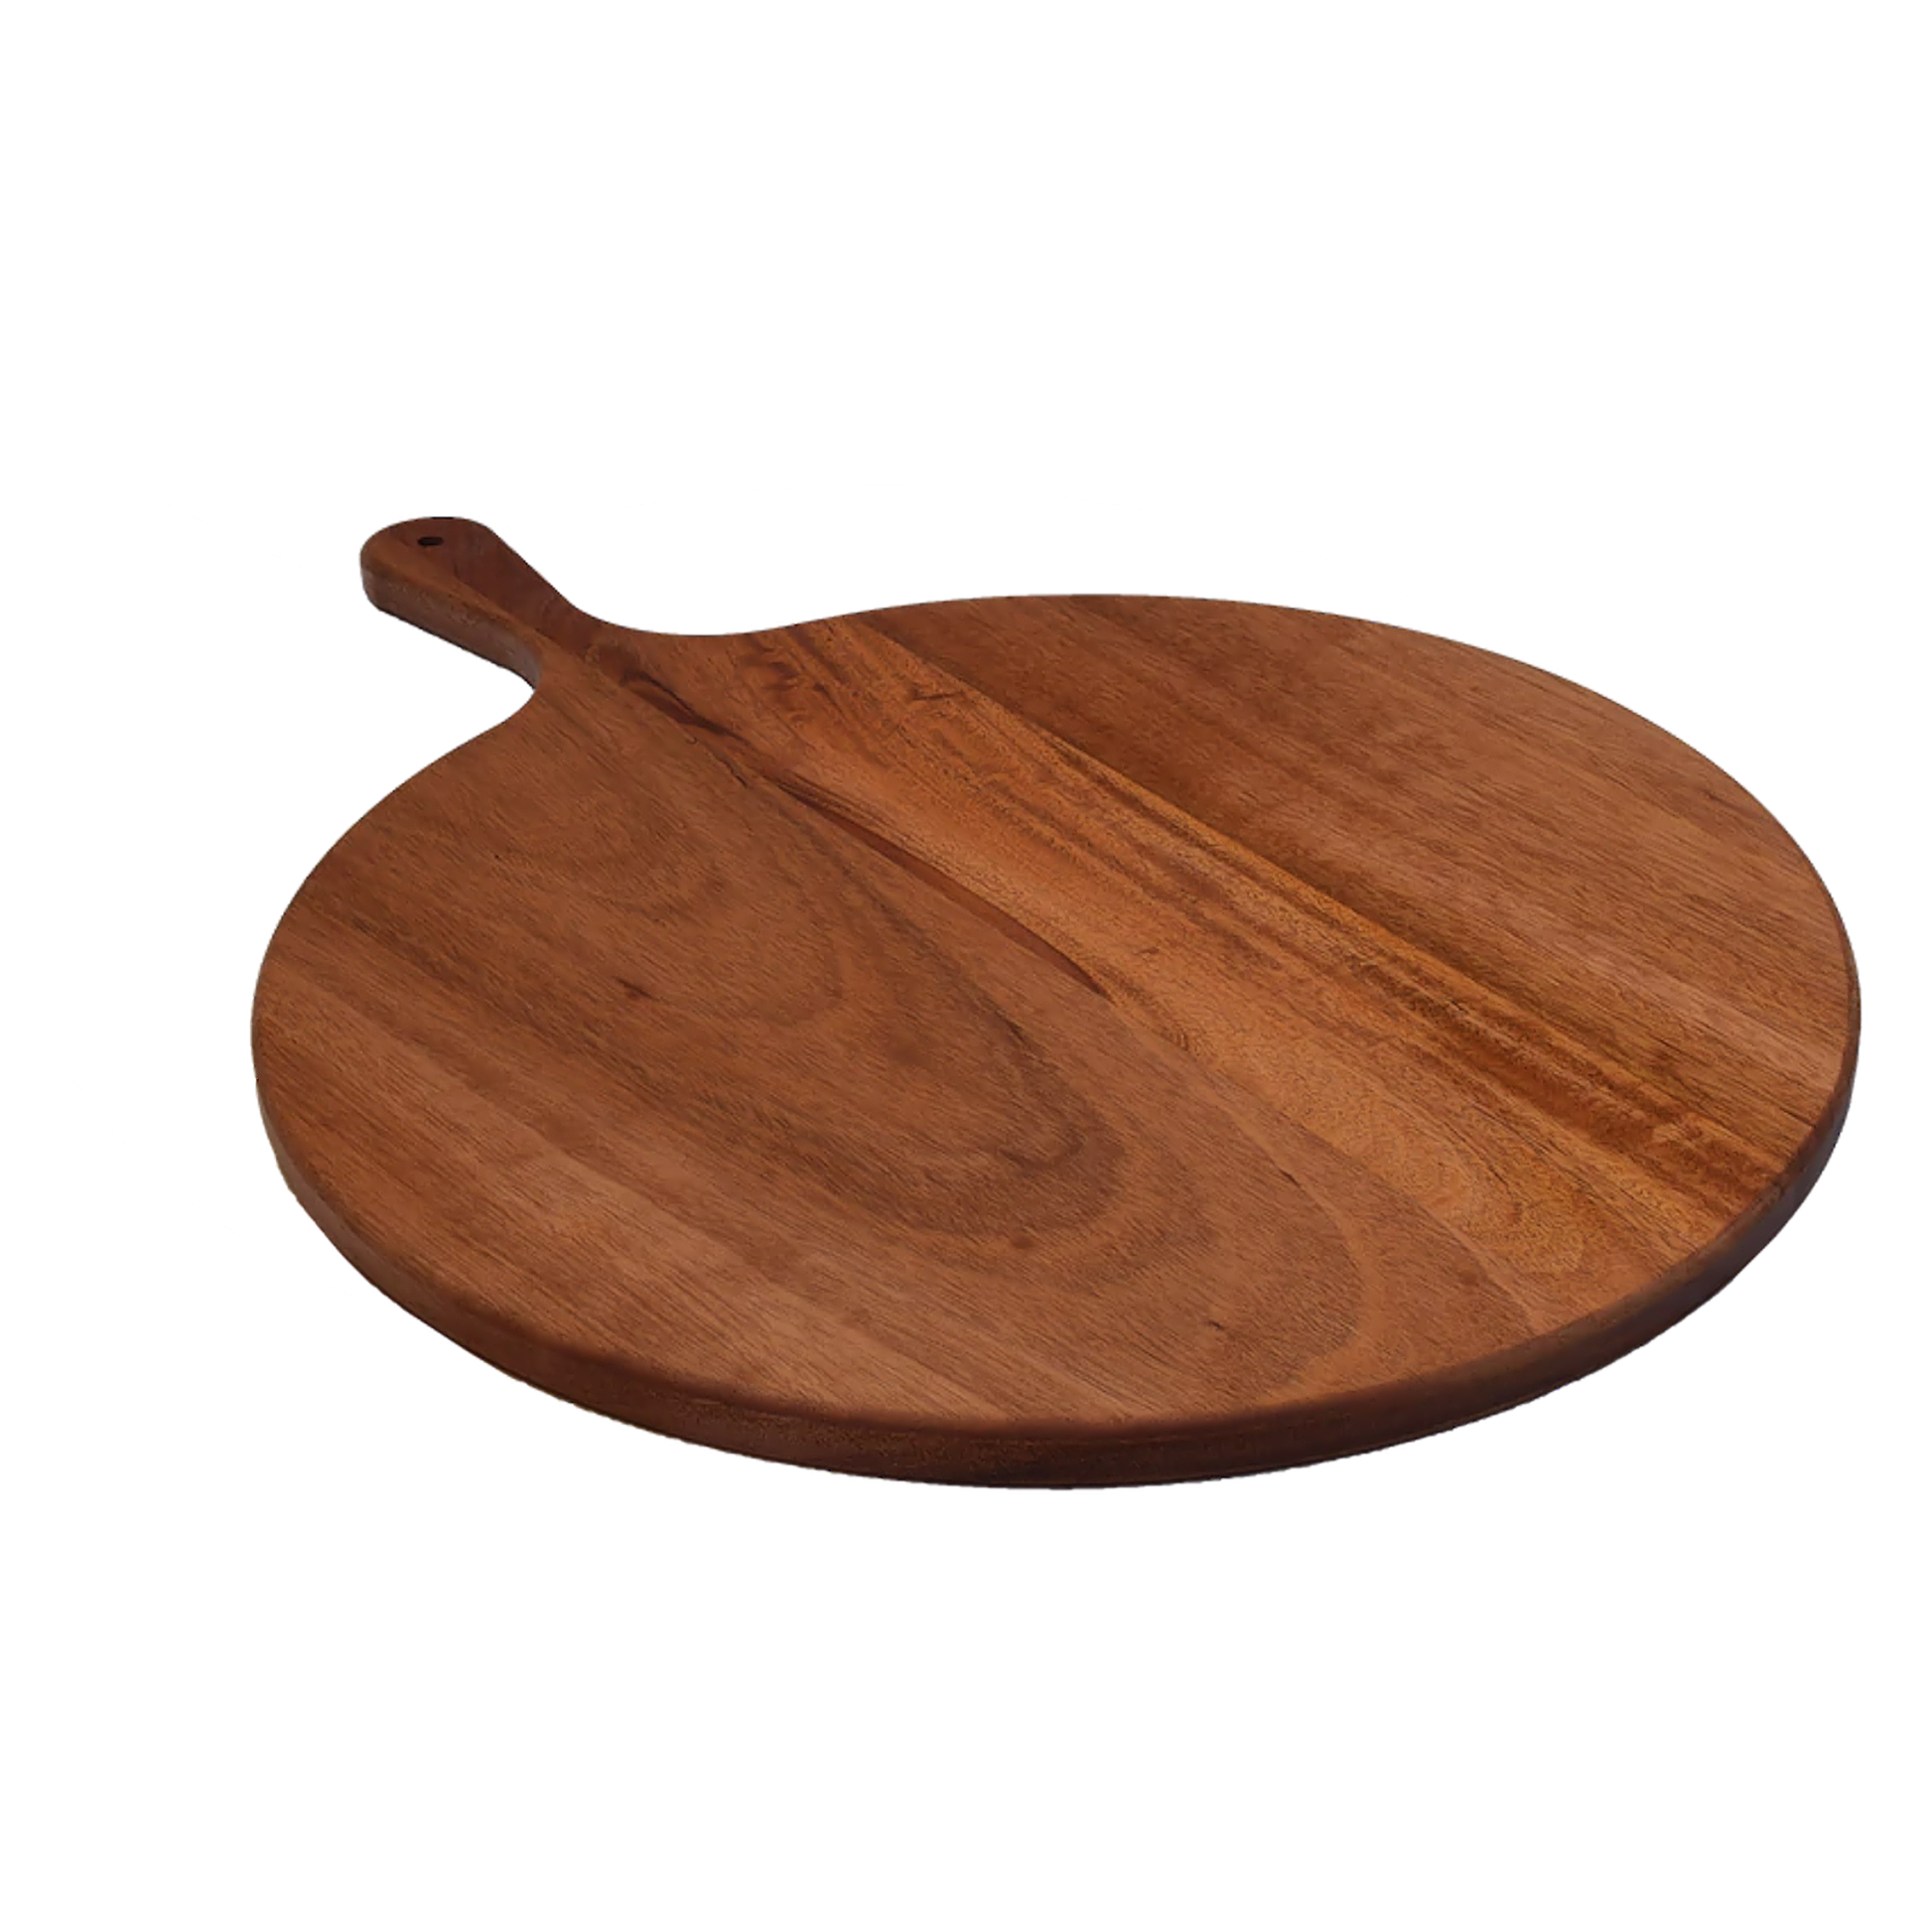 Handmade Hardwood Round Paddle Board, pizza board, serving tray